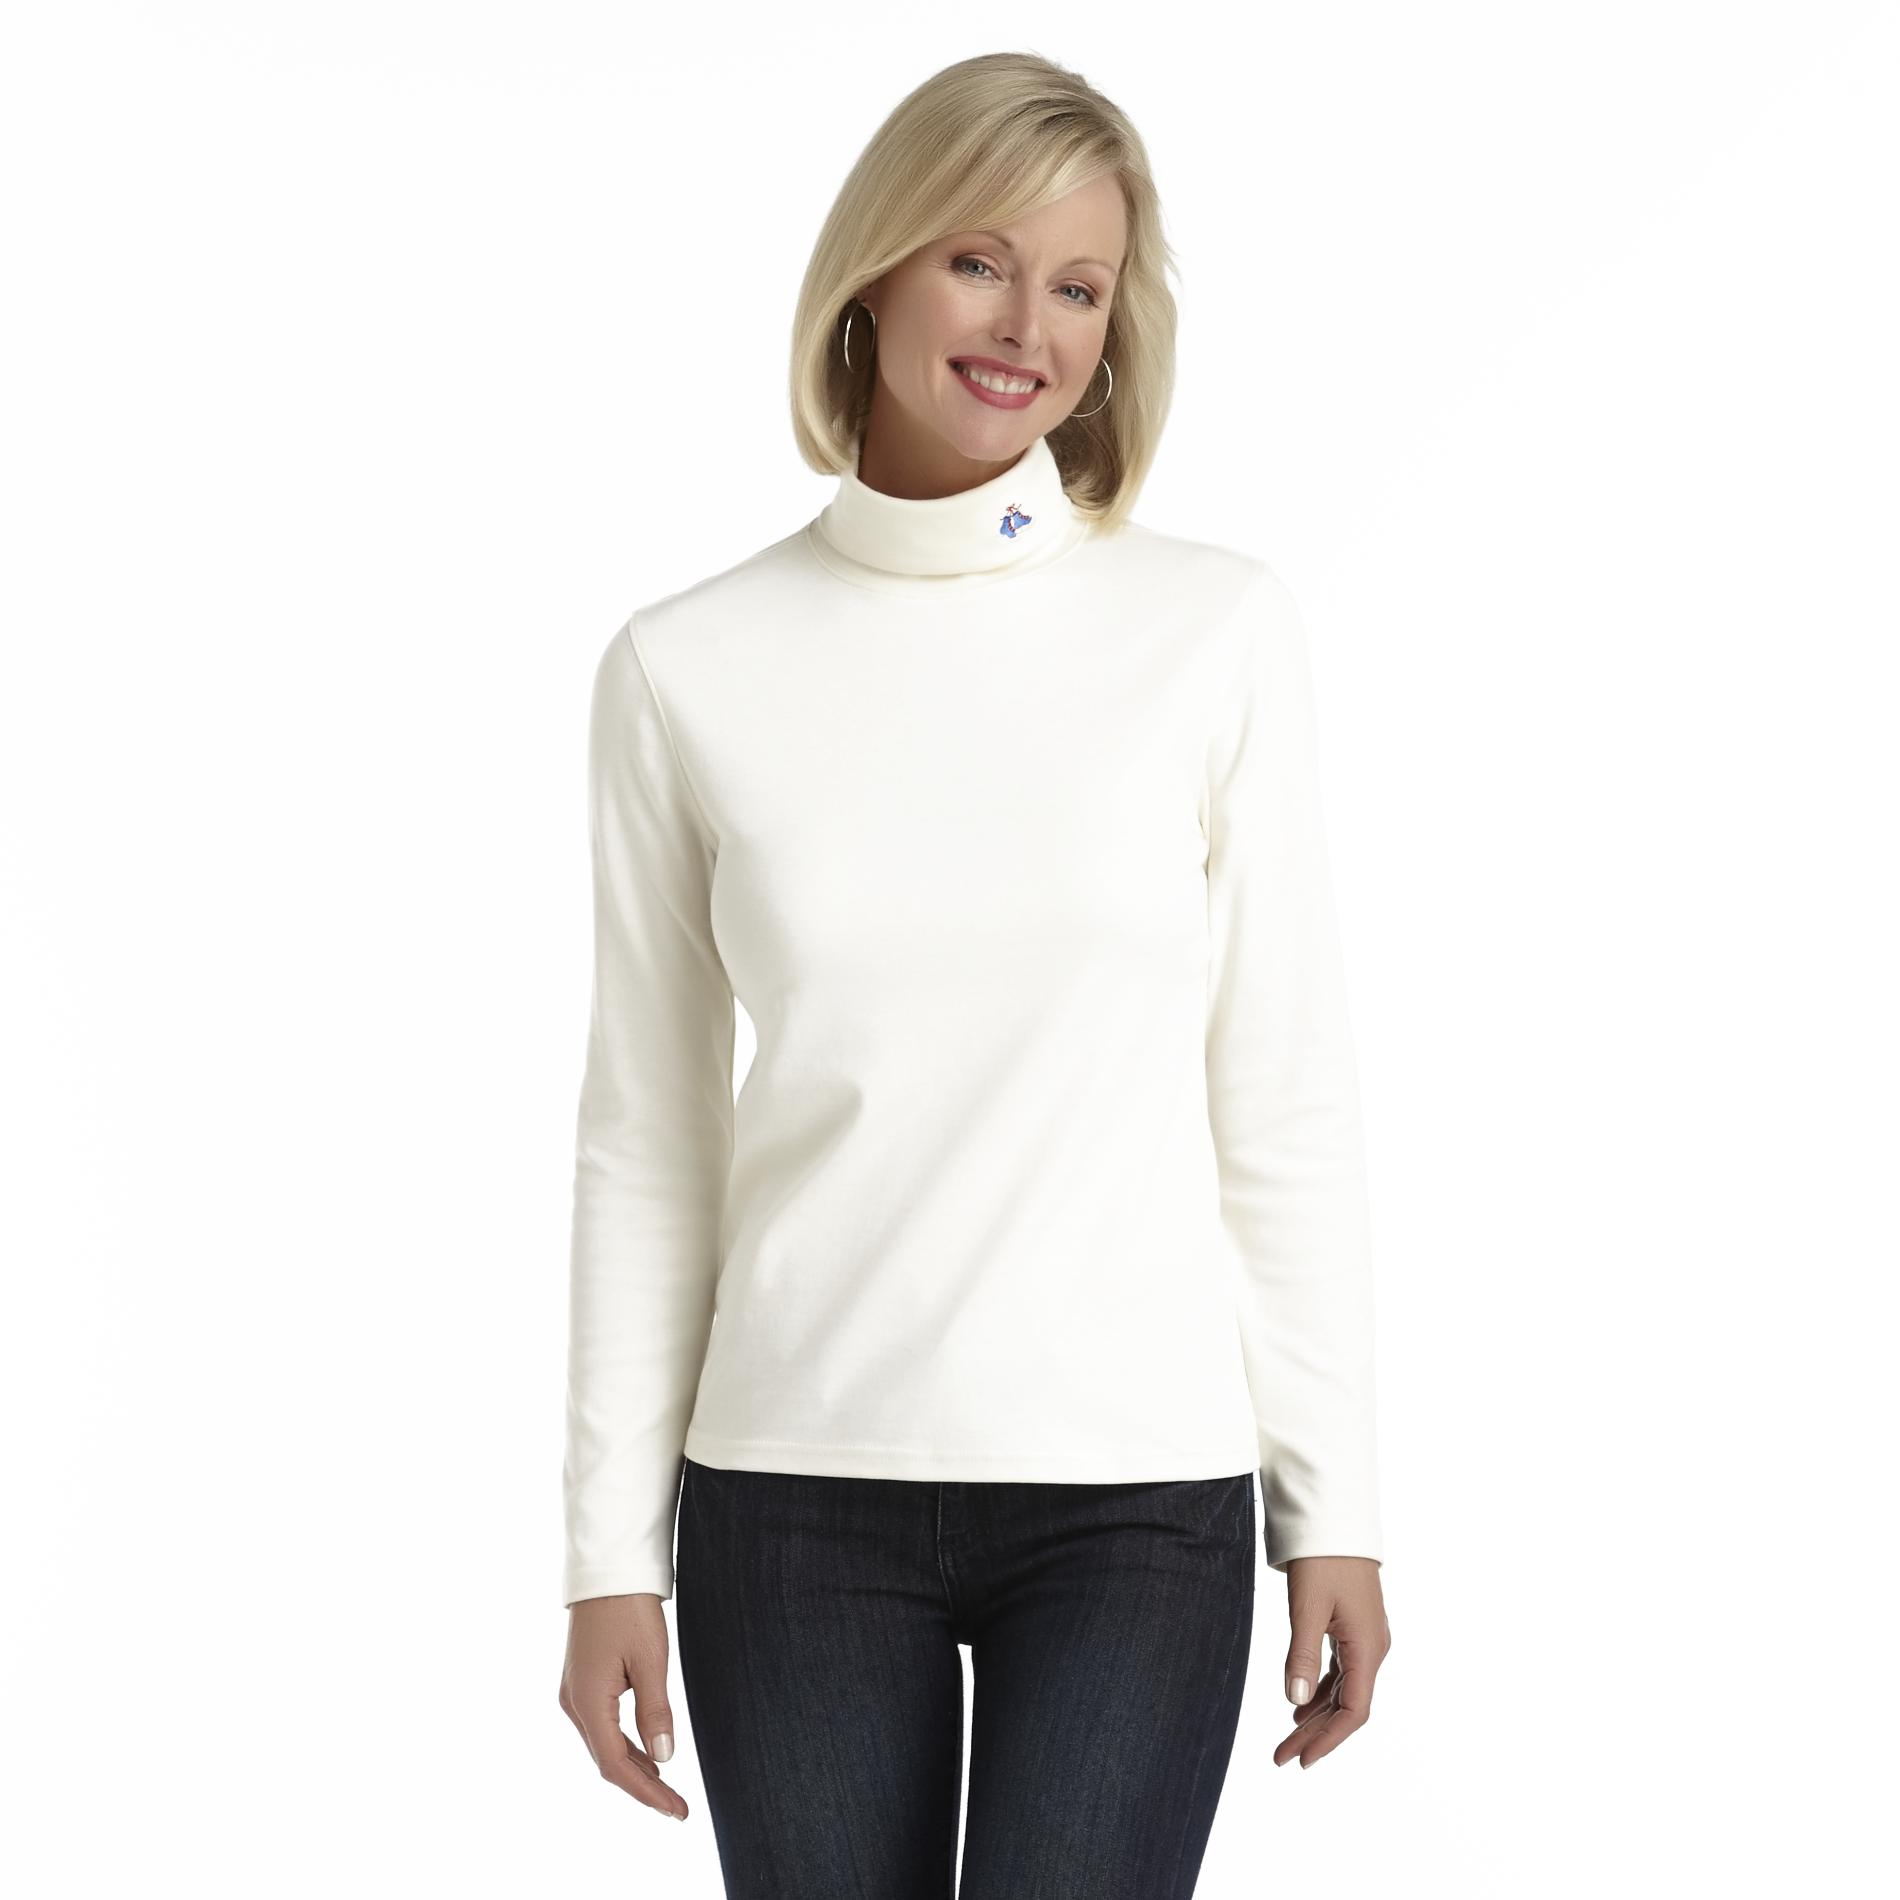 Holiday Editions Women's Embroidered Turtleneck - Ice Skates